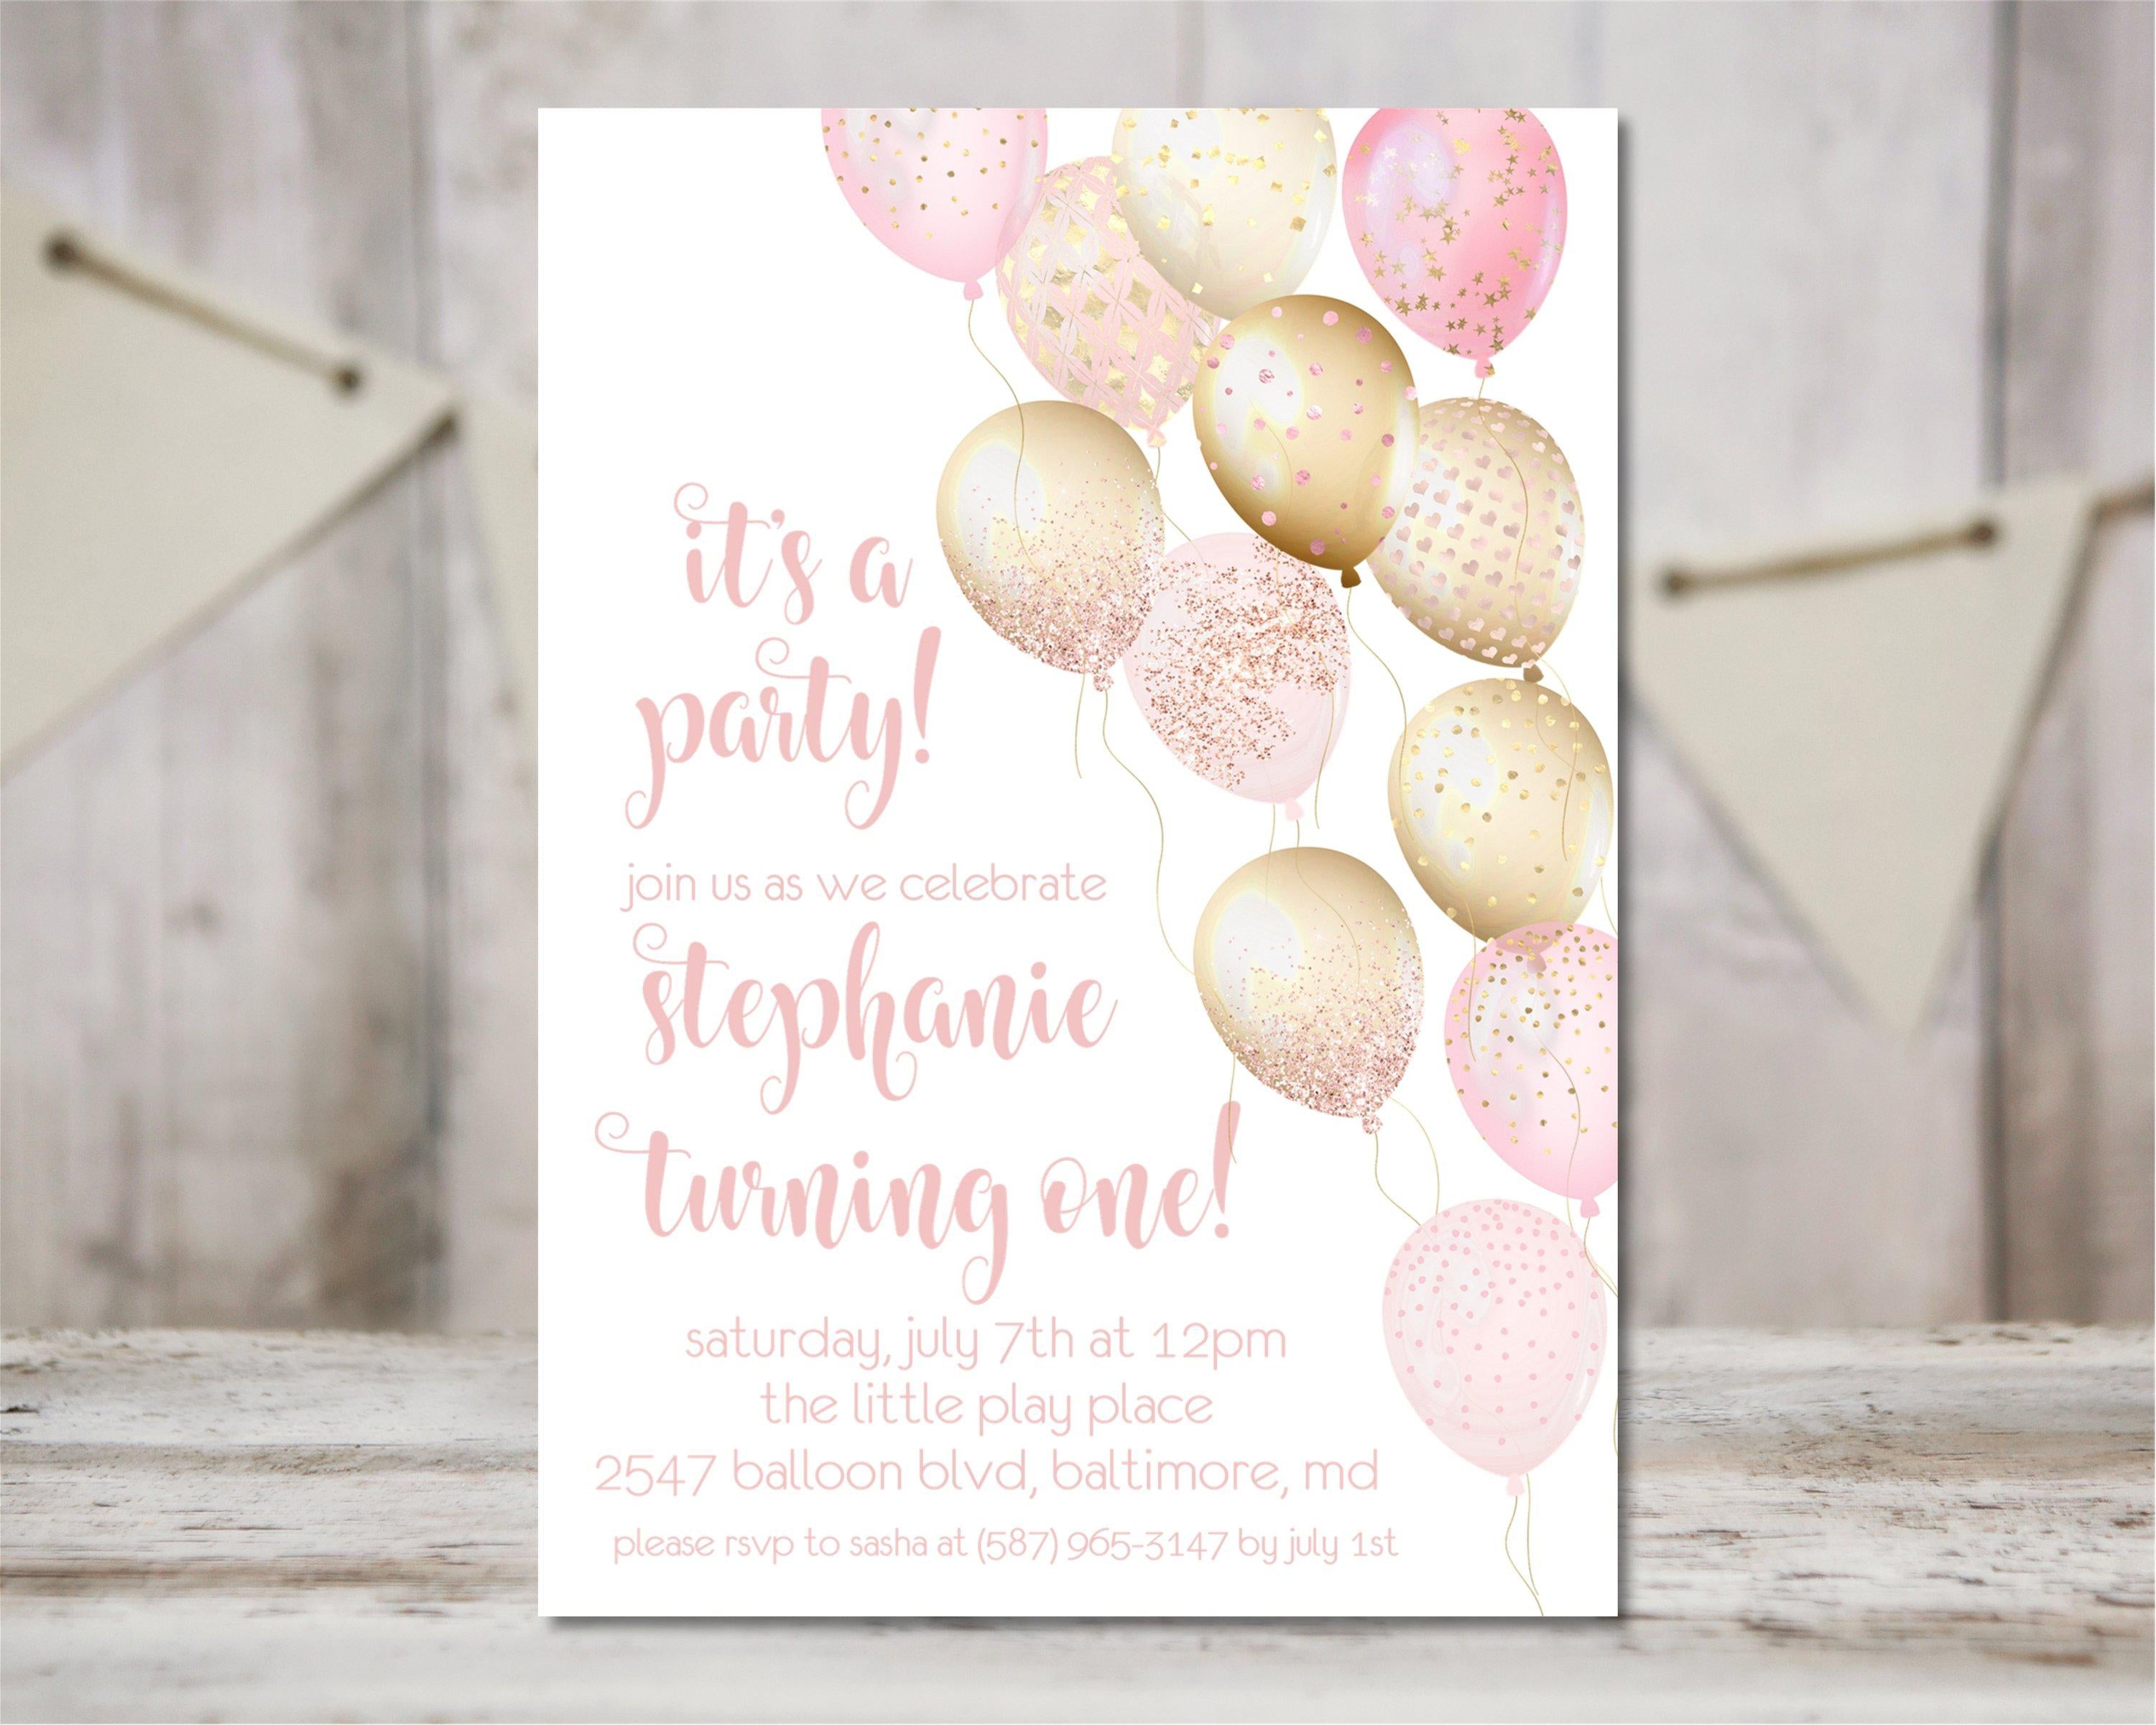 Blush Pink And Gold Balloon Birthday Party Invitations